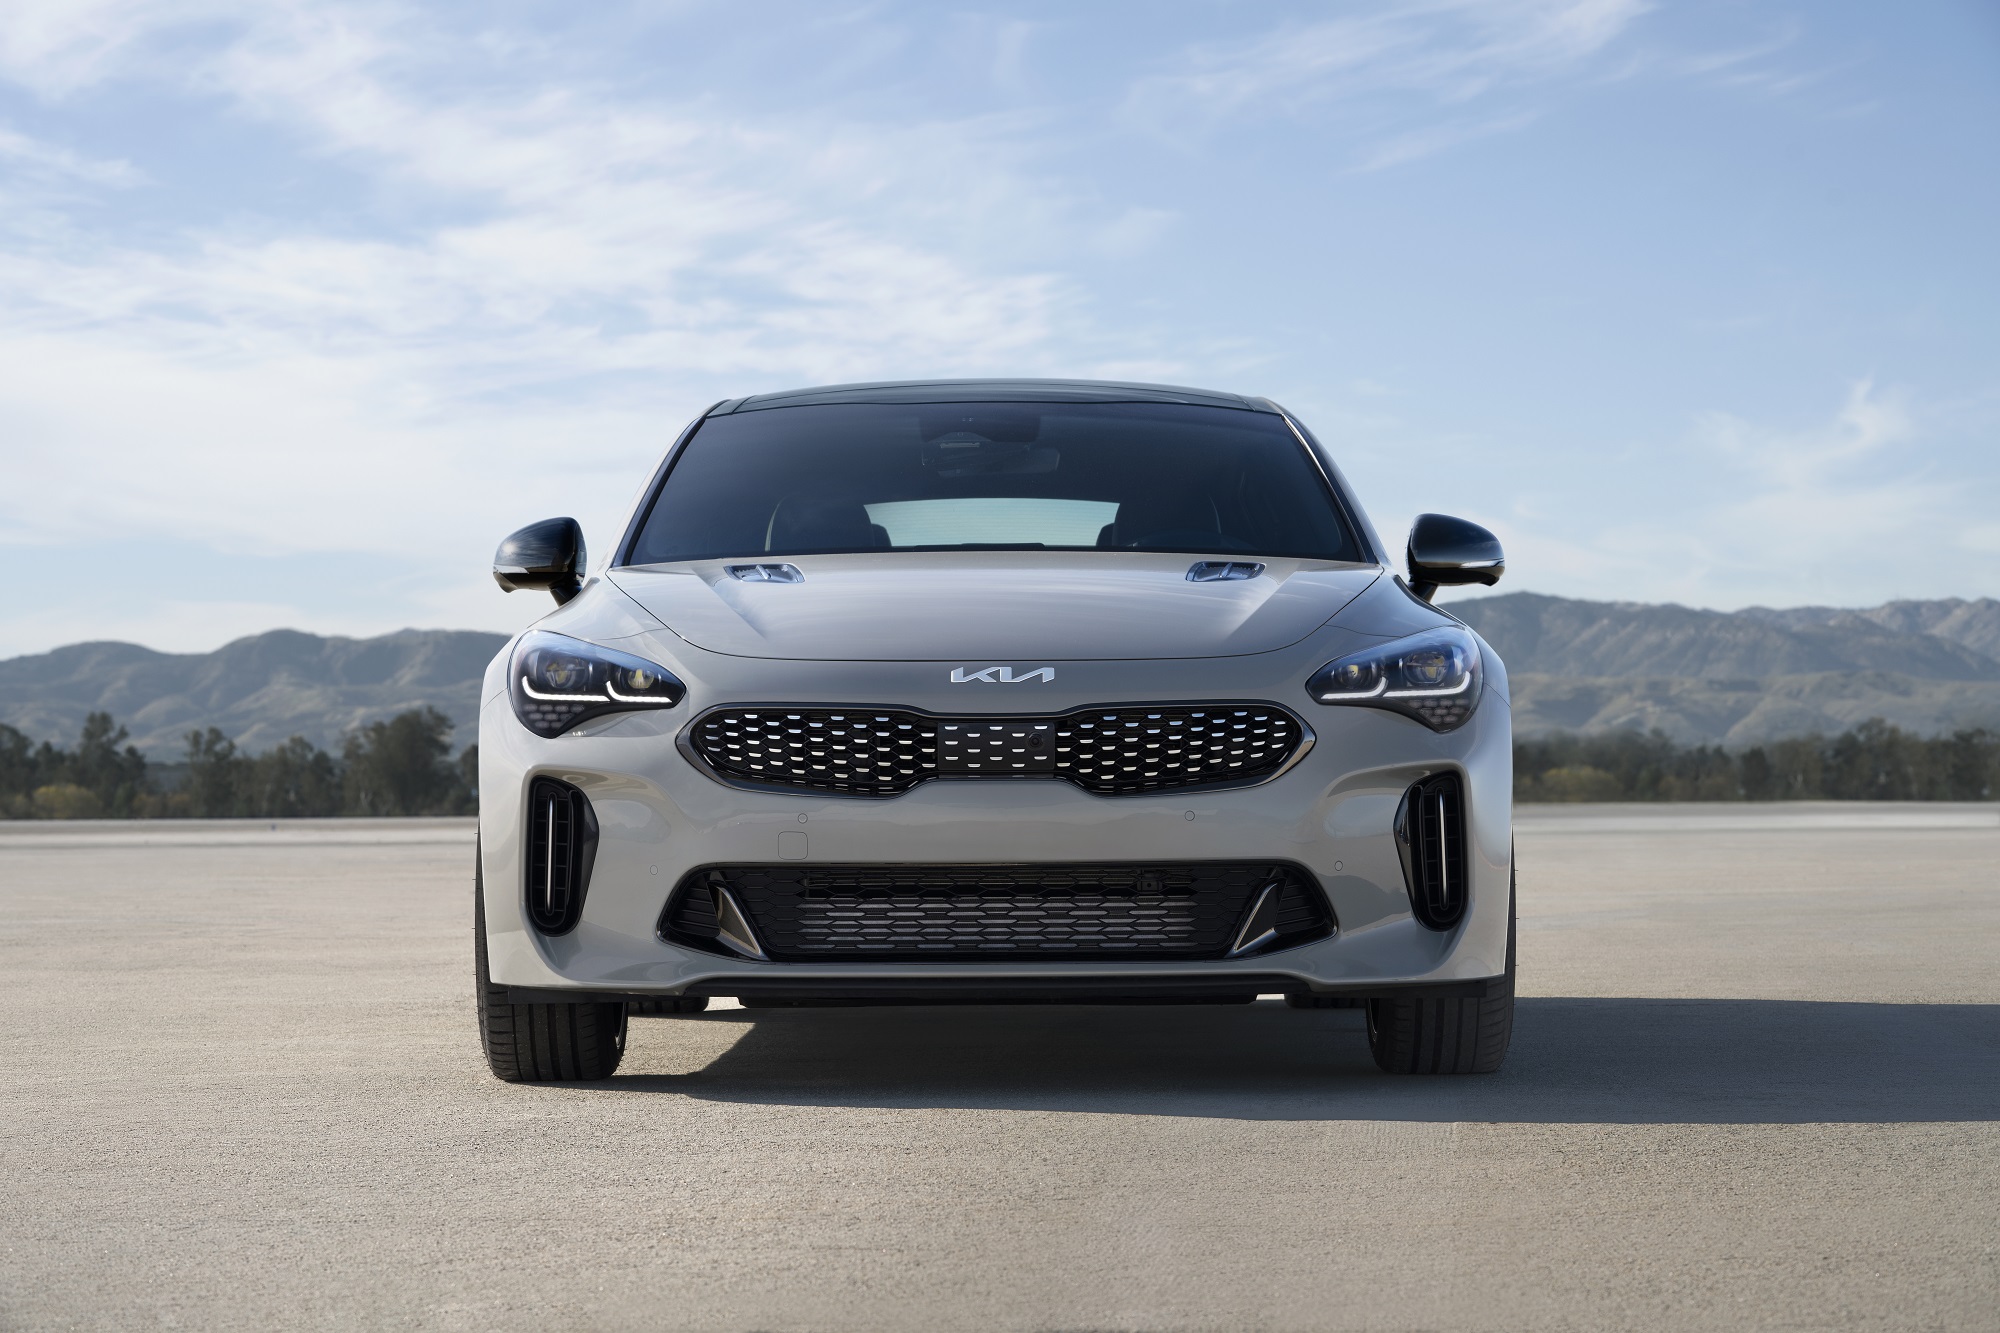 A gray Kia Stinger shows off its subtly styled front end.